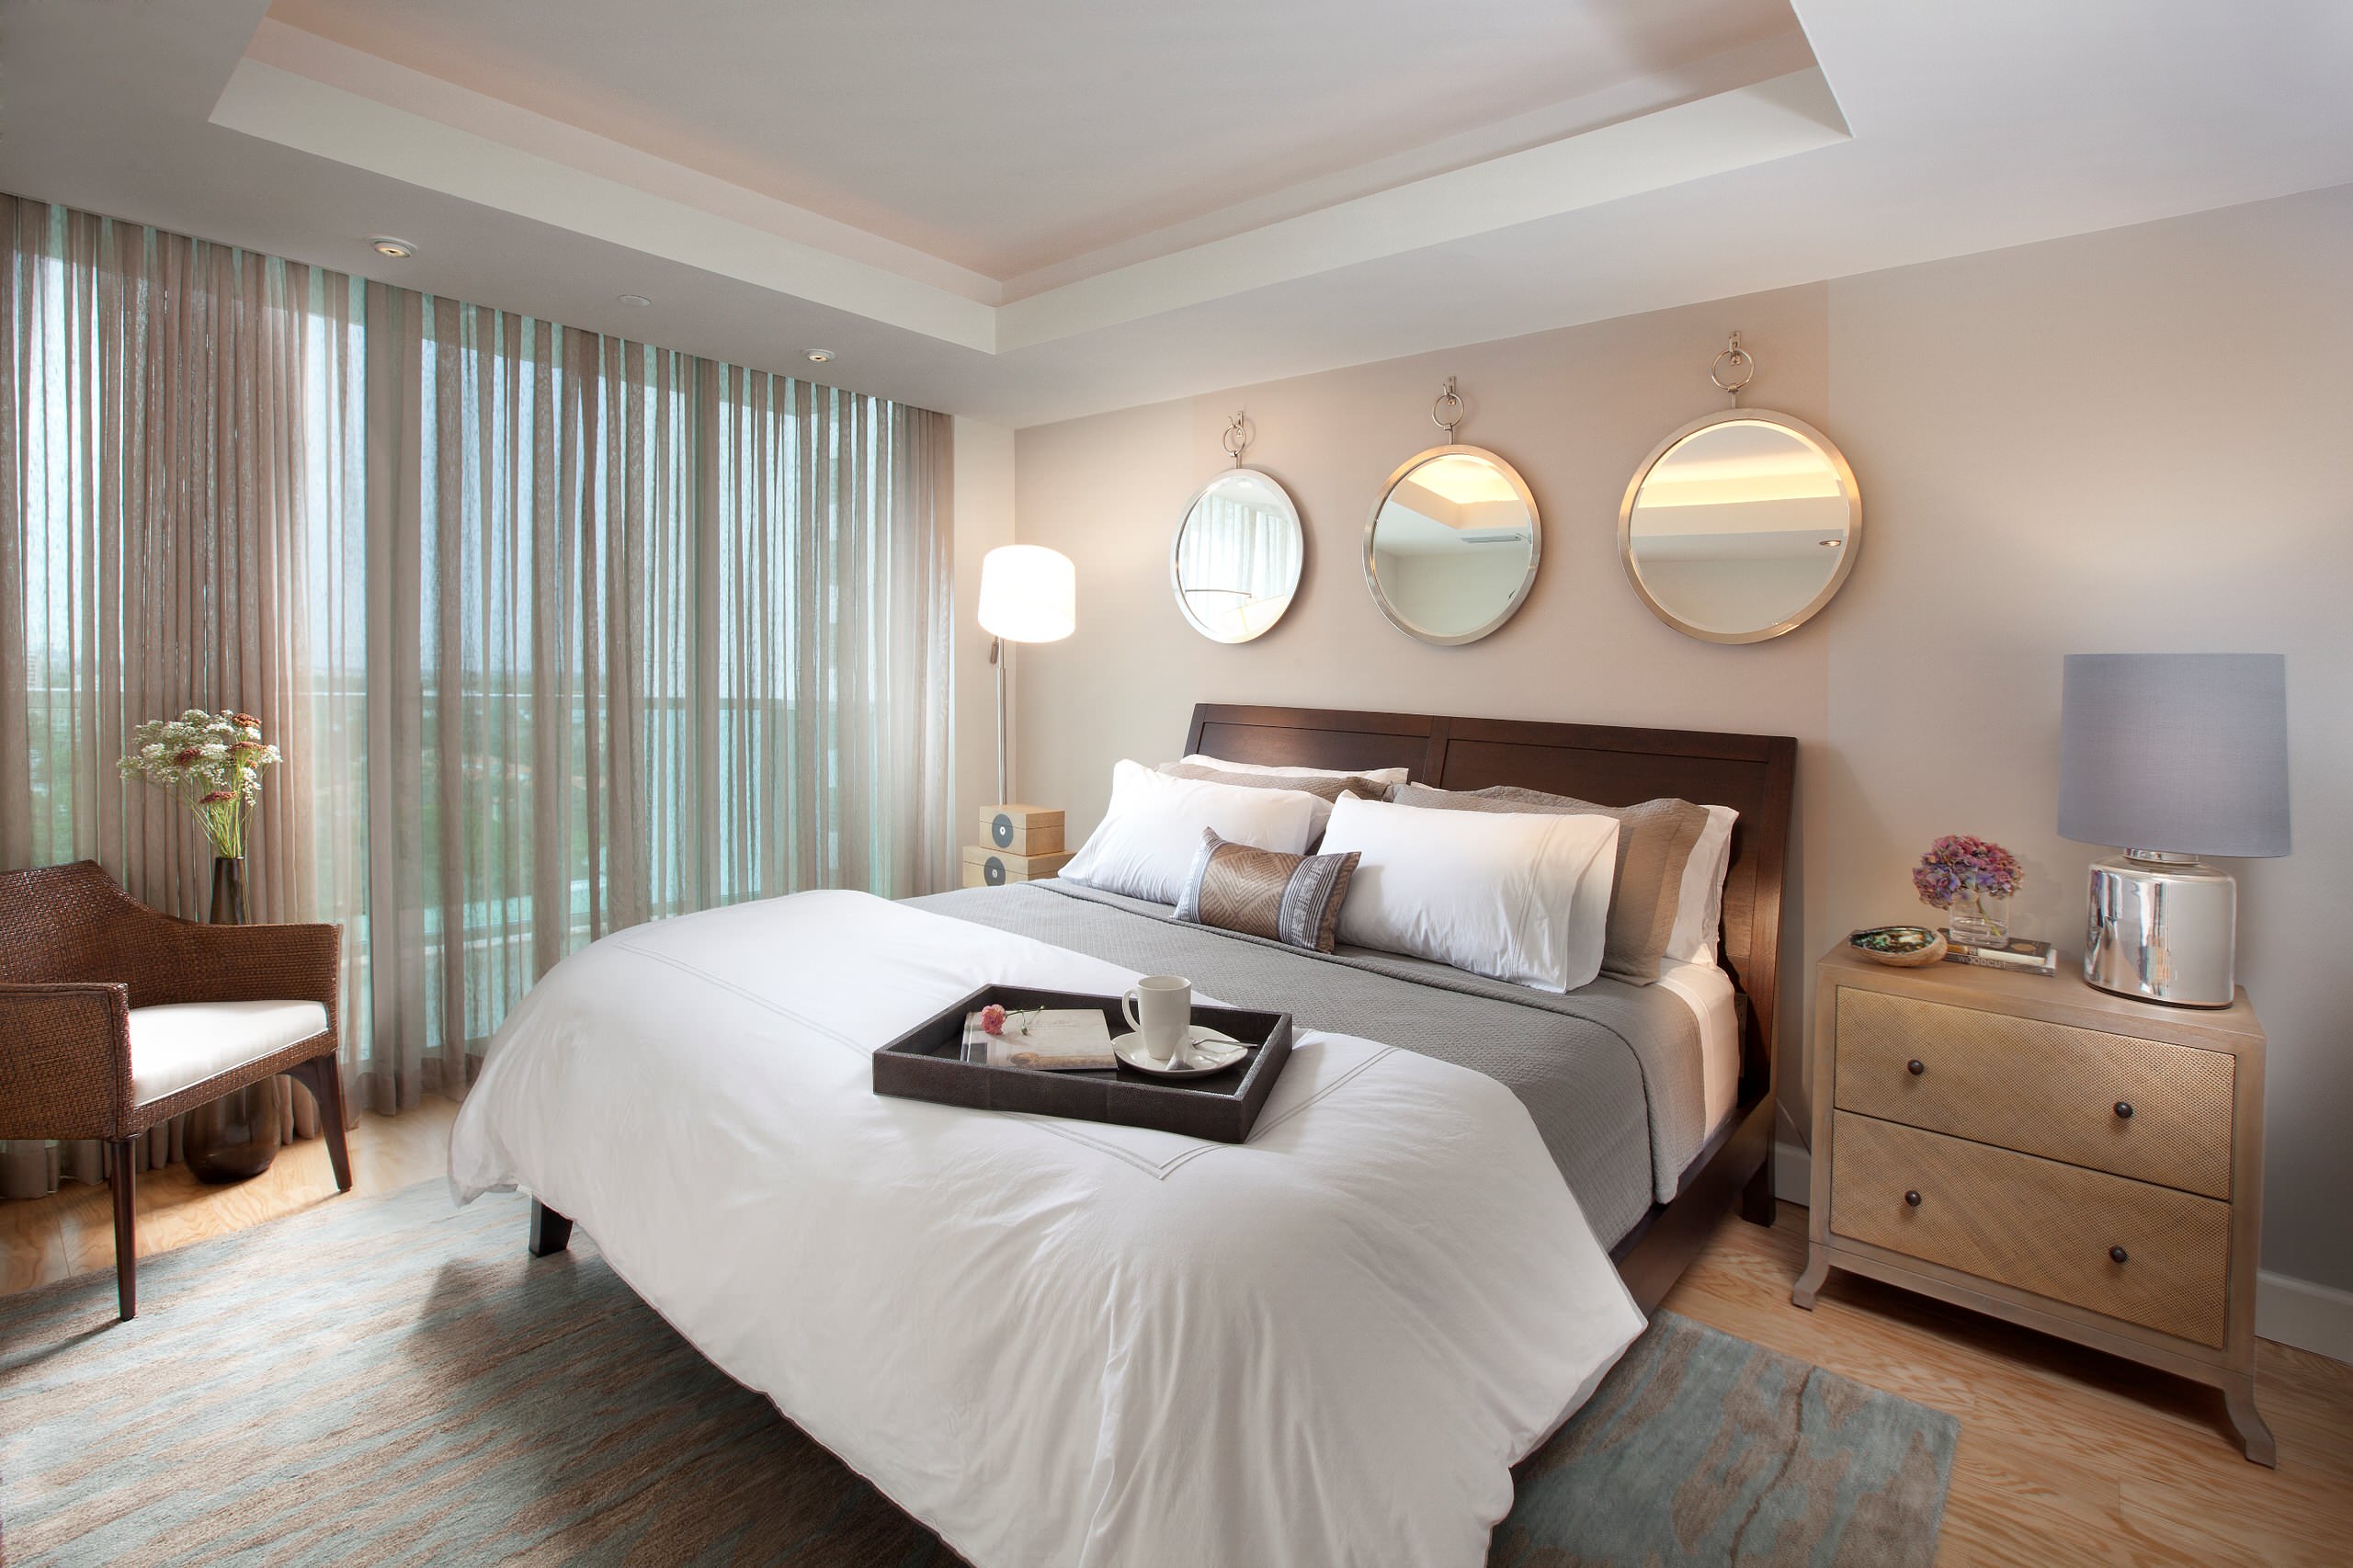 Mirror Above Bed Houzz, How To Install Mirror Above Bed